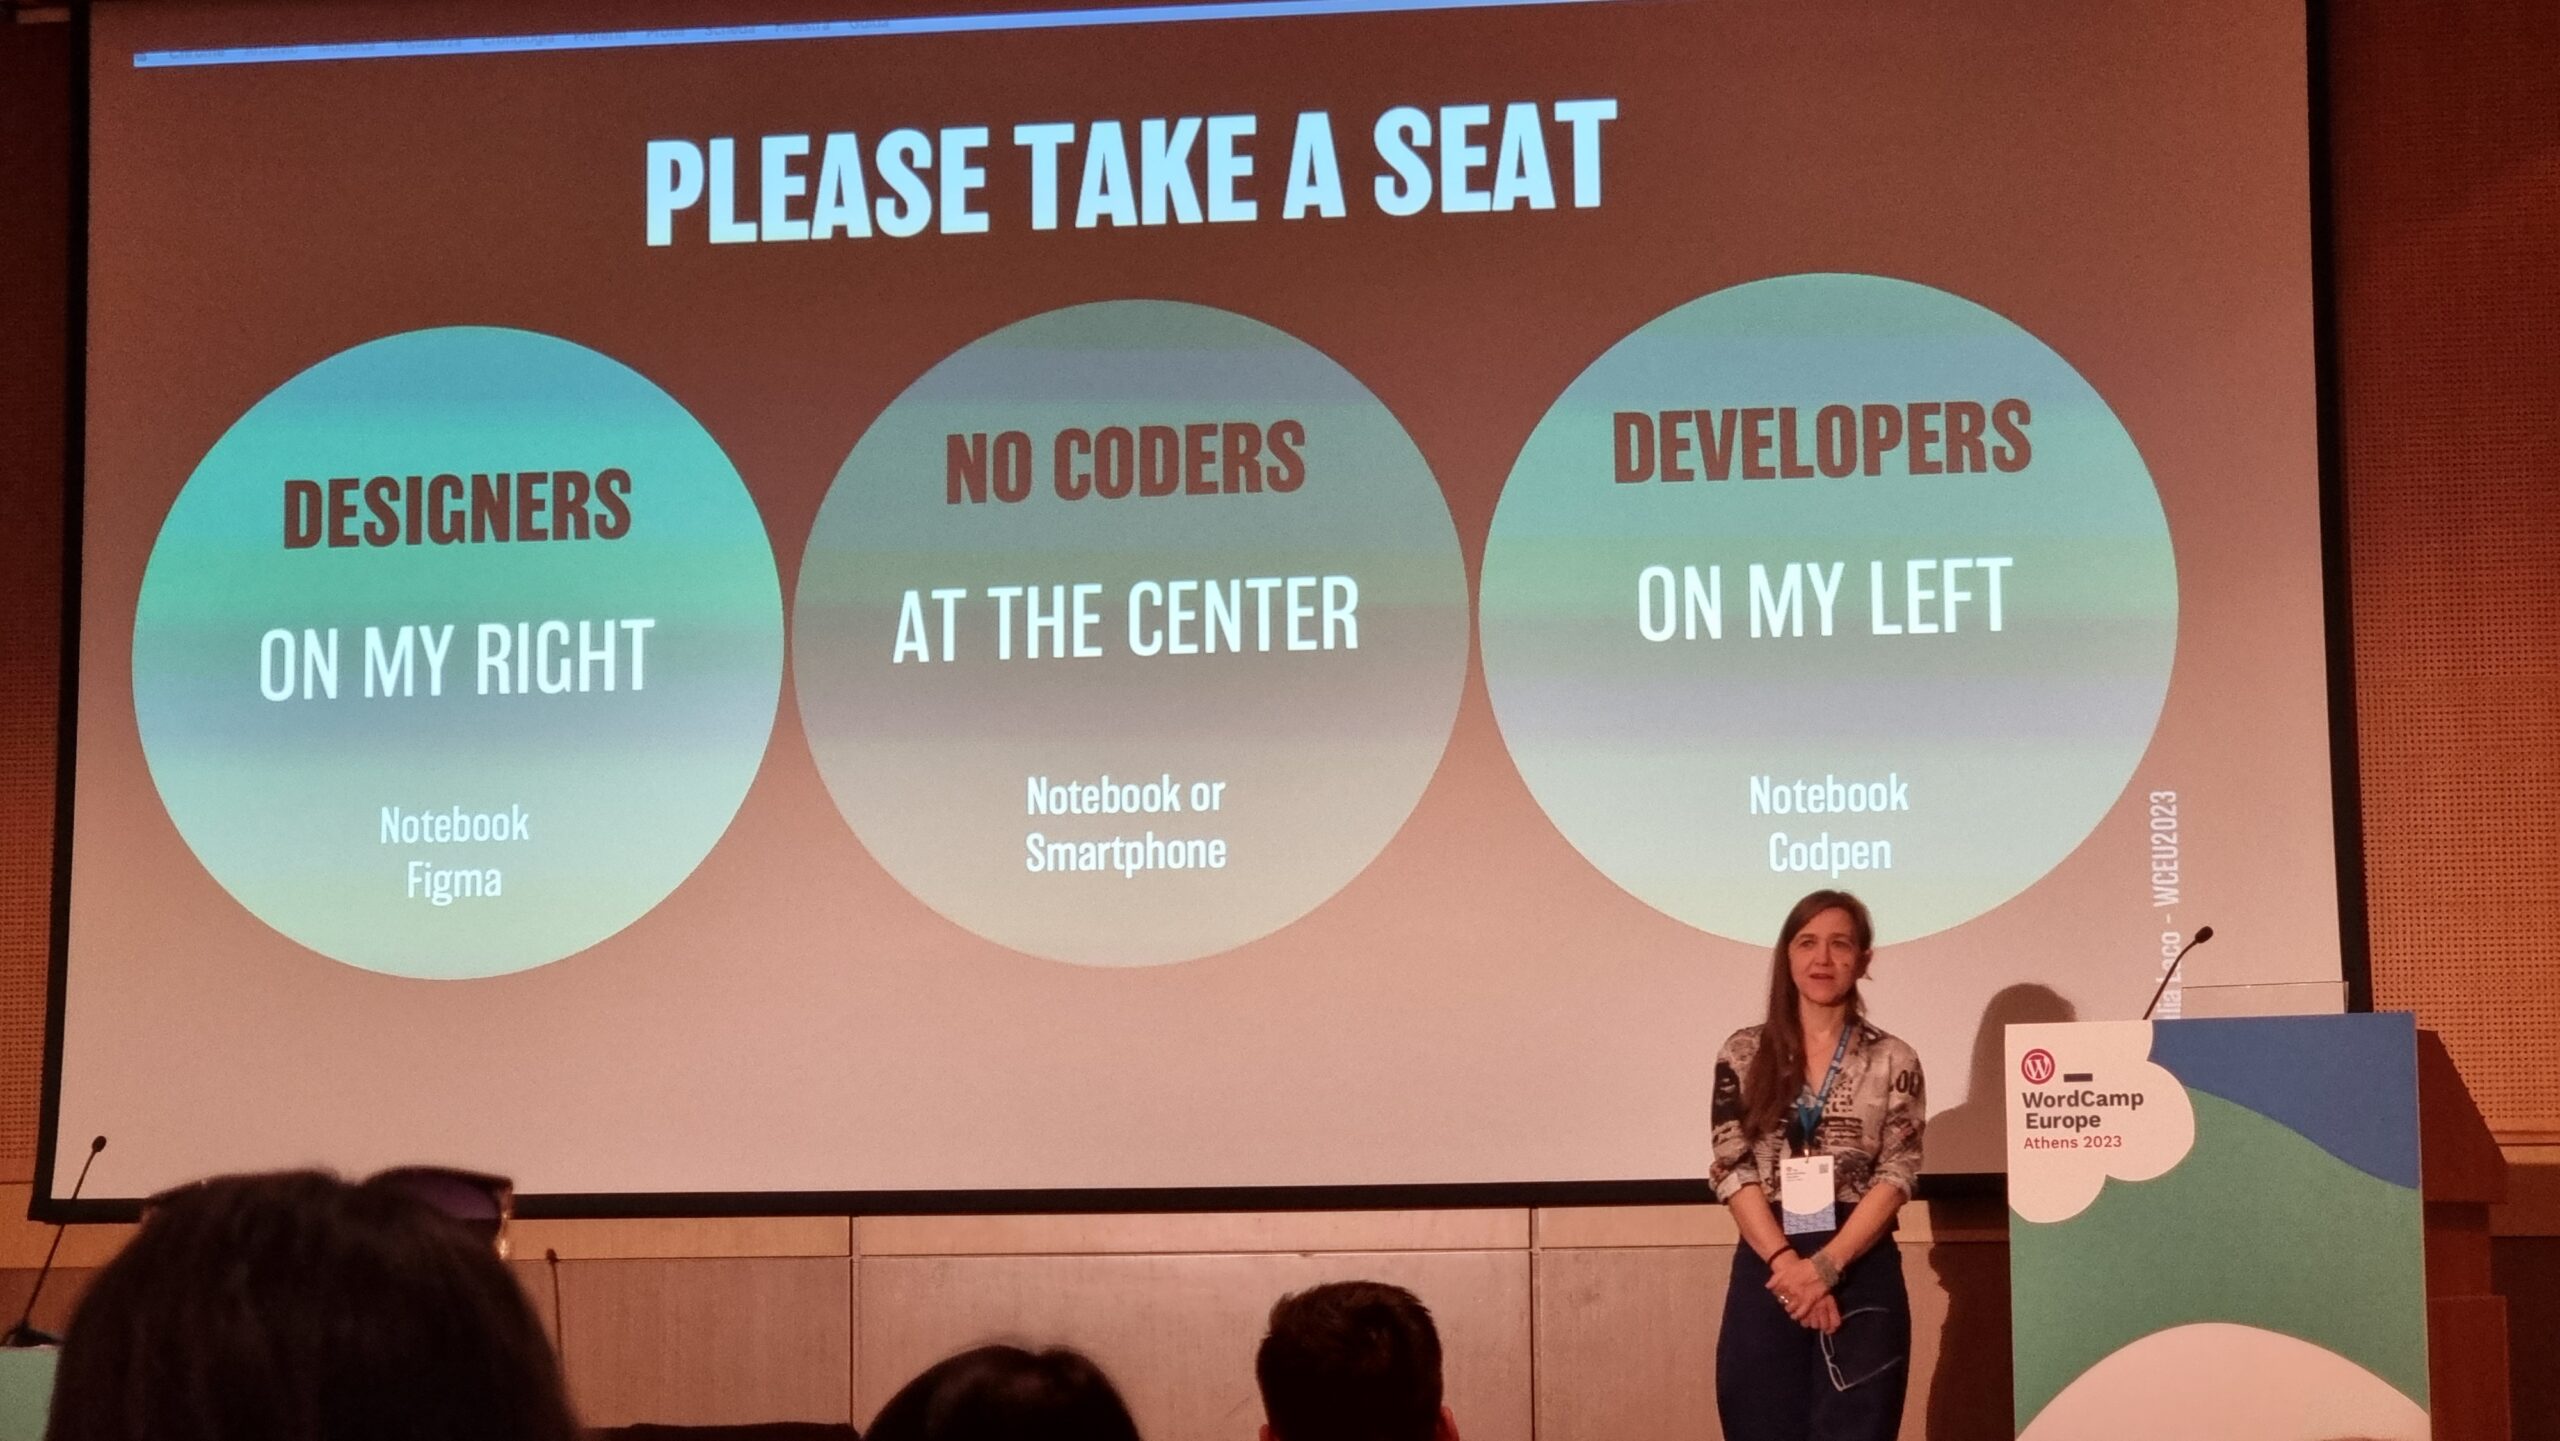 A title slide encourages designers to sit on the left (to the right of the speaker), developers to the right (on her left), and "no-coders" in the centre.